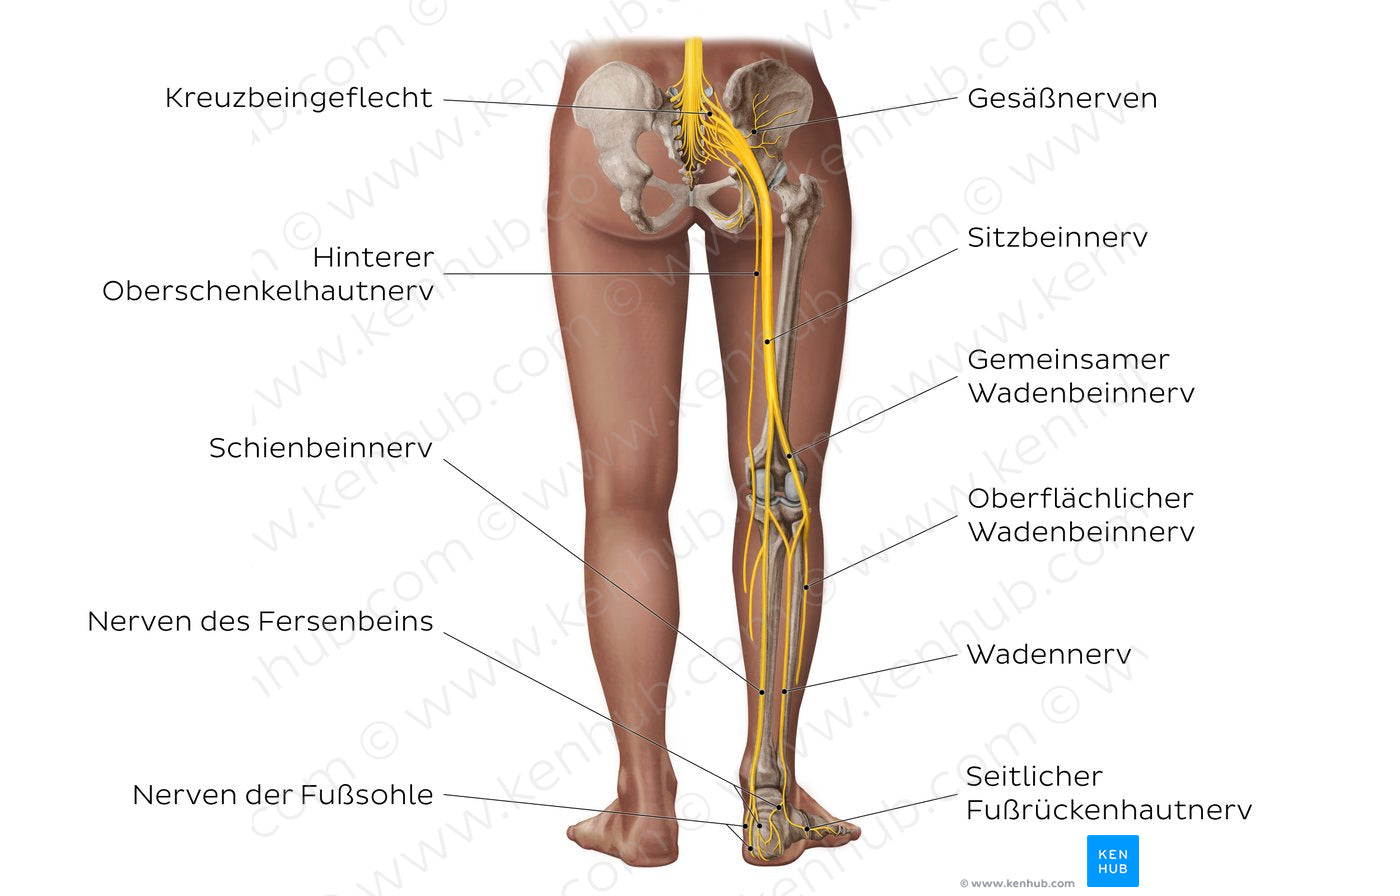 Main nerves of the lower limb - posterior (German)